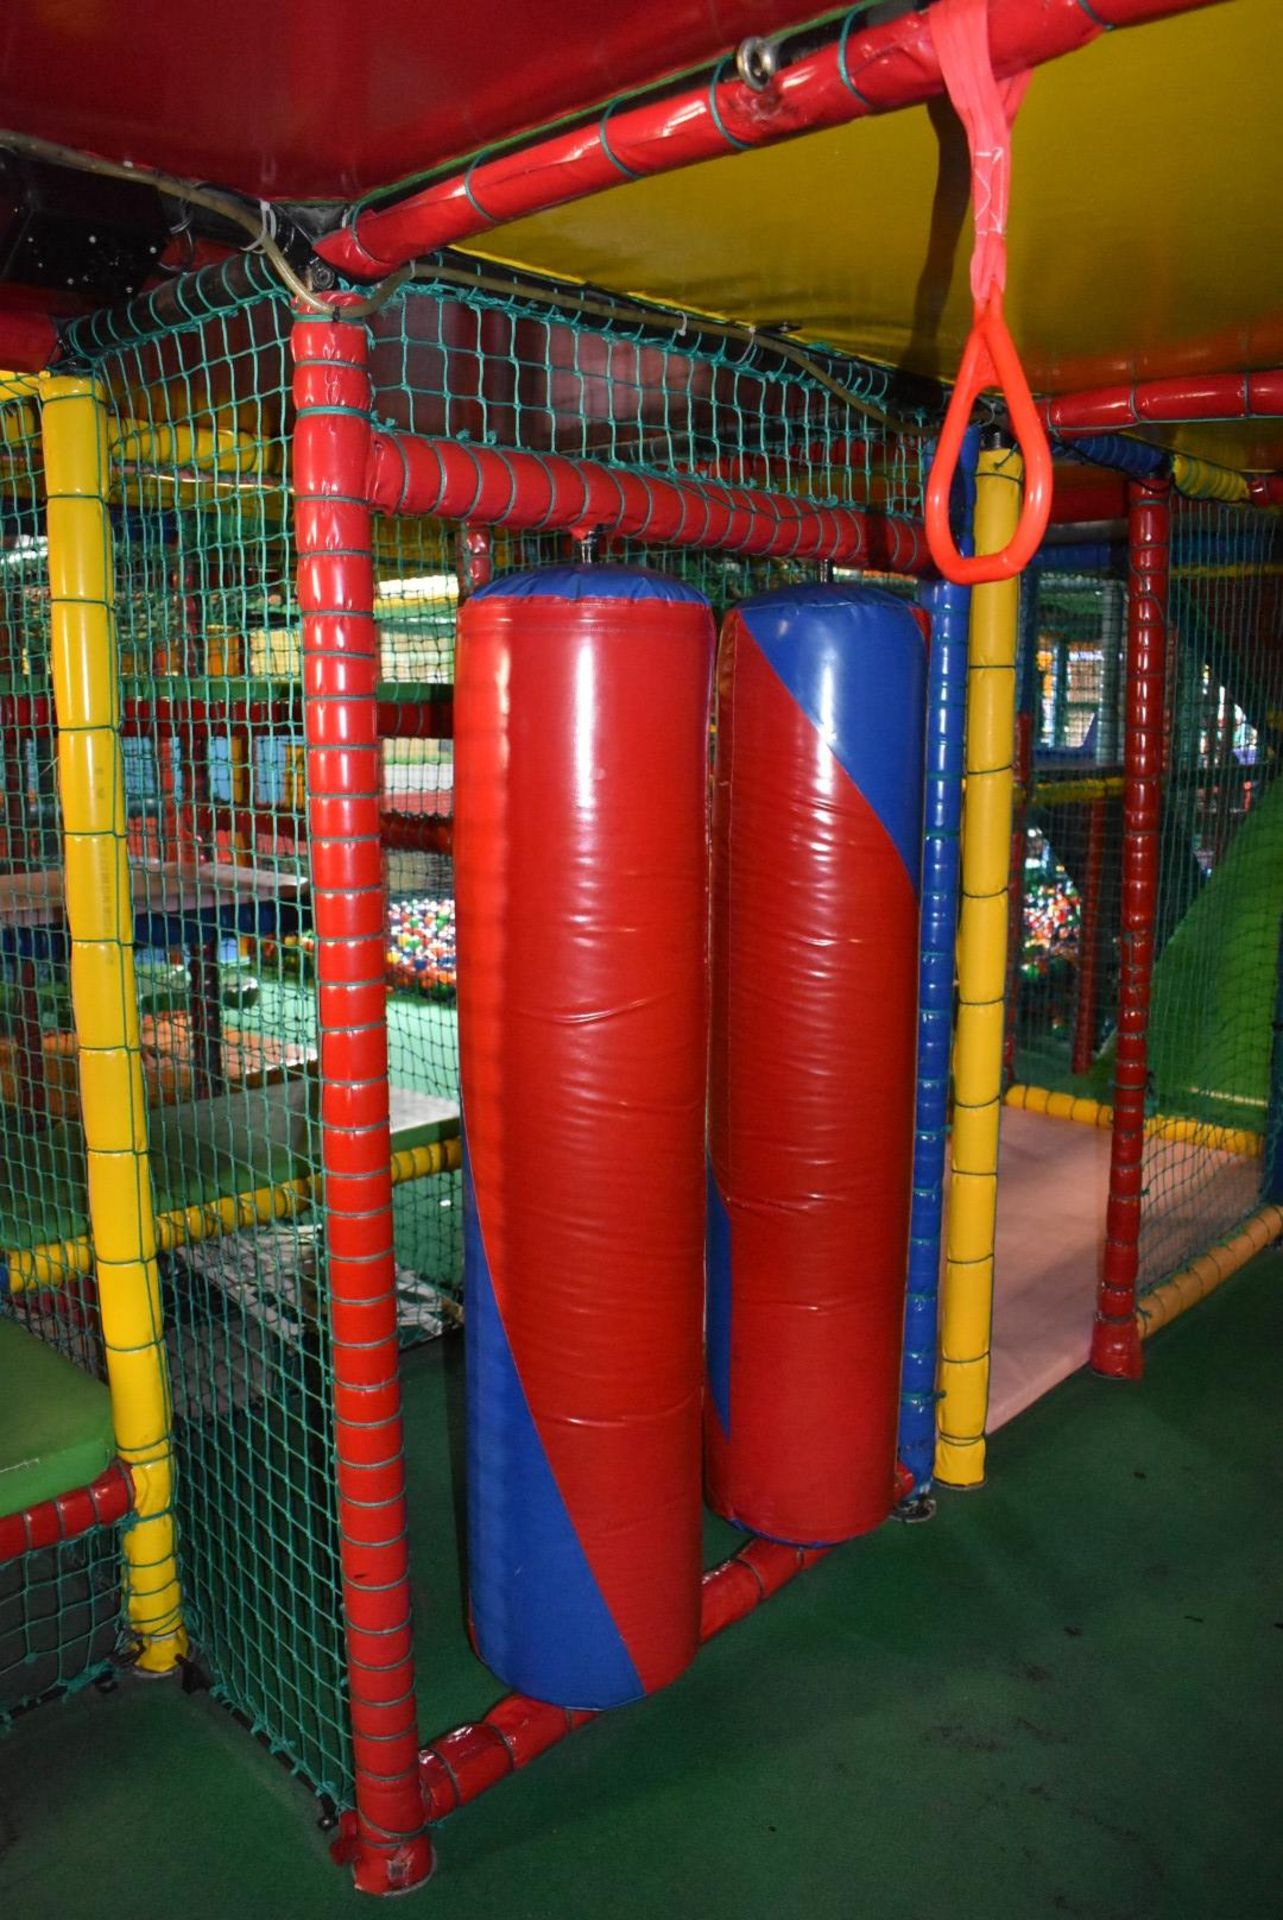 Bramleys Big Adventure Playground - Giant Action-Packed Playcentre With Slides, Zip Line Swings, - Image 18 of 128